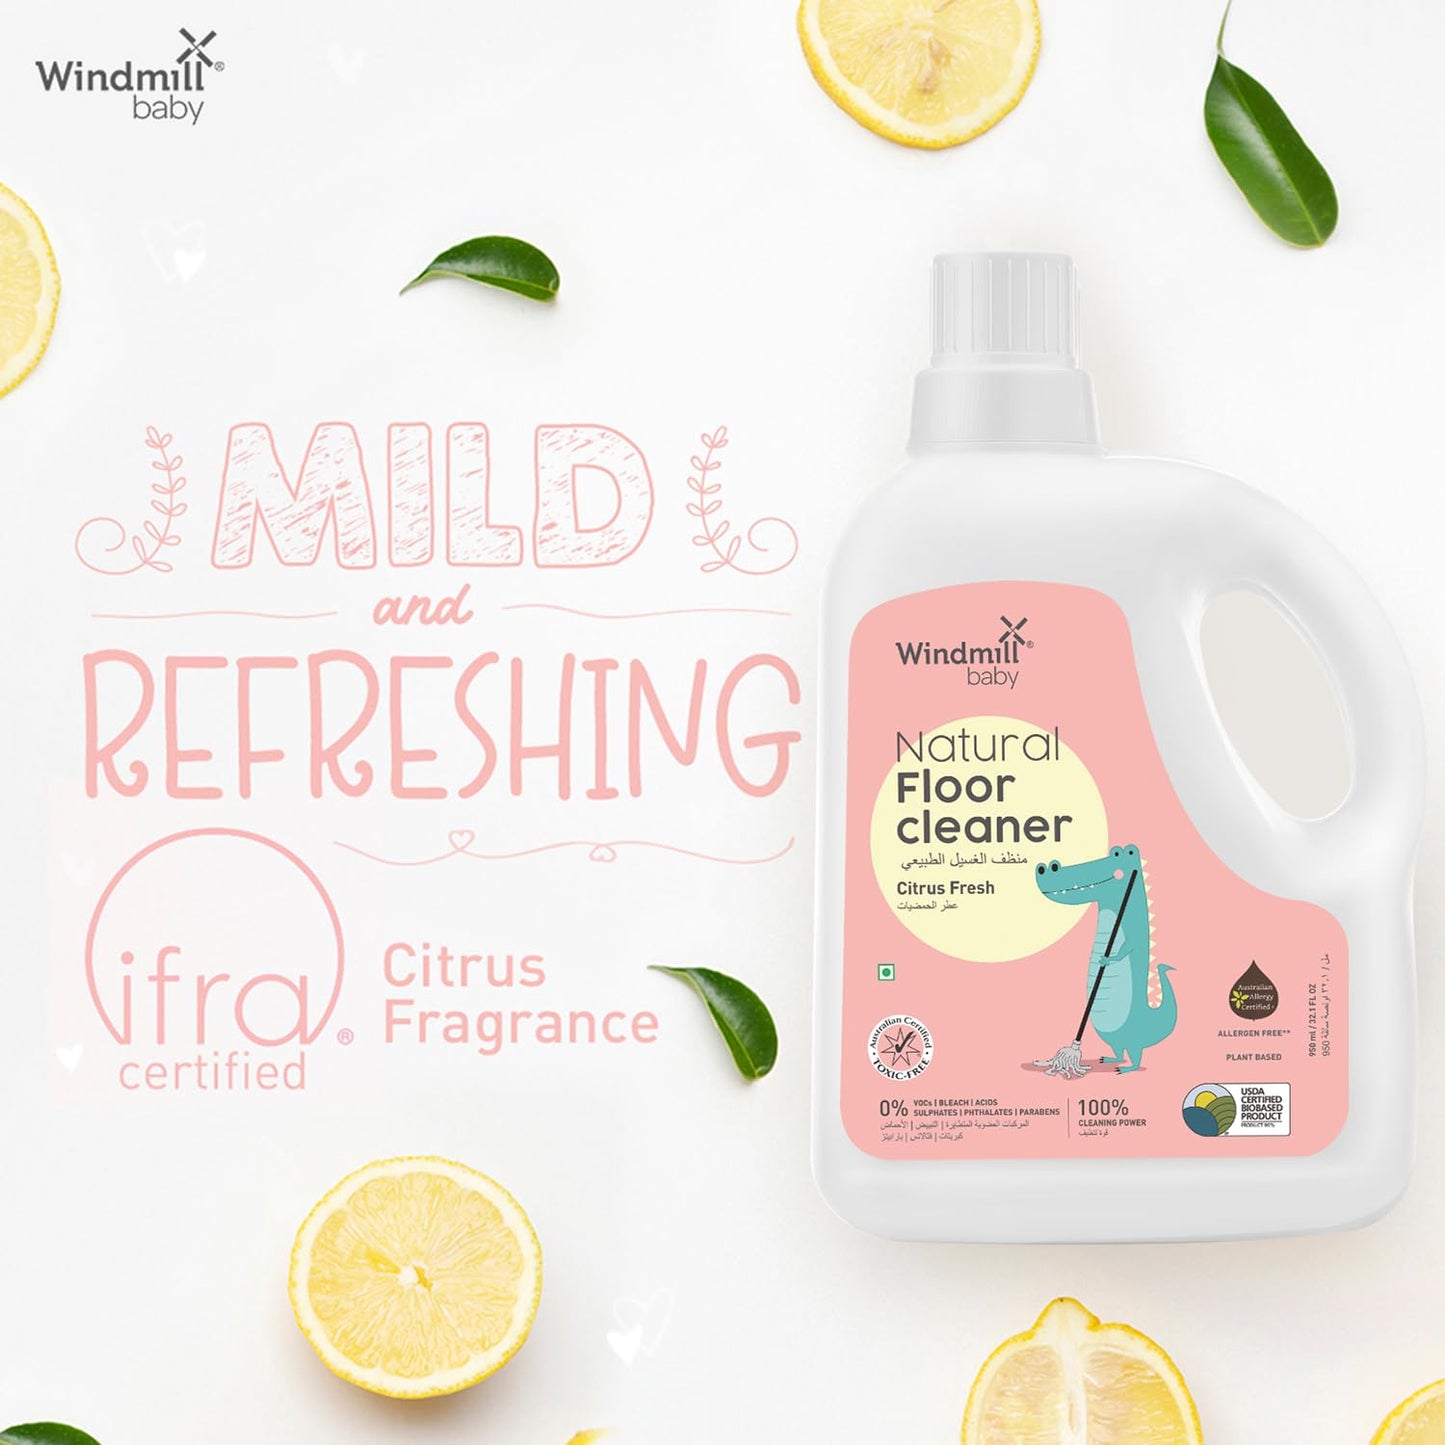 Windmill baby USDA Certified Natural Floor Cleaner, Allergen & Alcohol Free, Baby Friendly, Pet Friendly, Citrus Fresh, For All Floor Types - 950ml